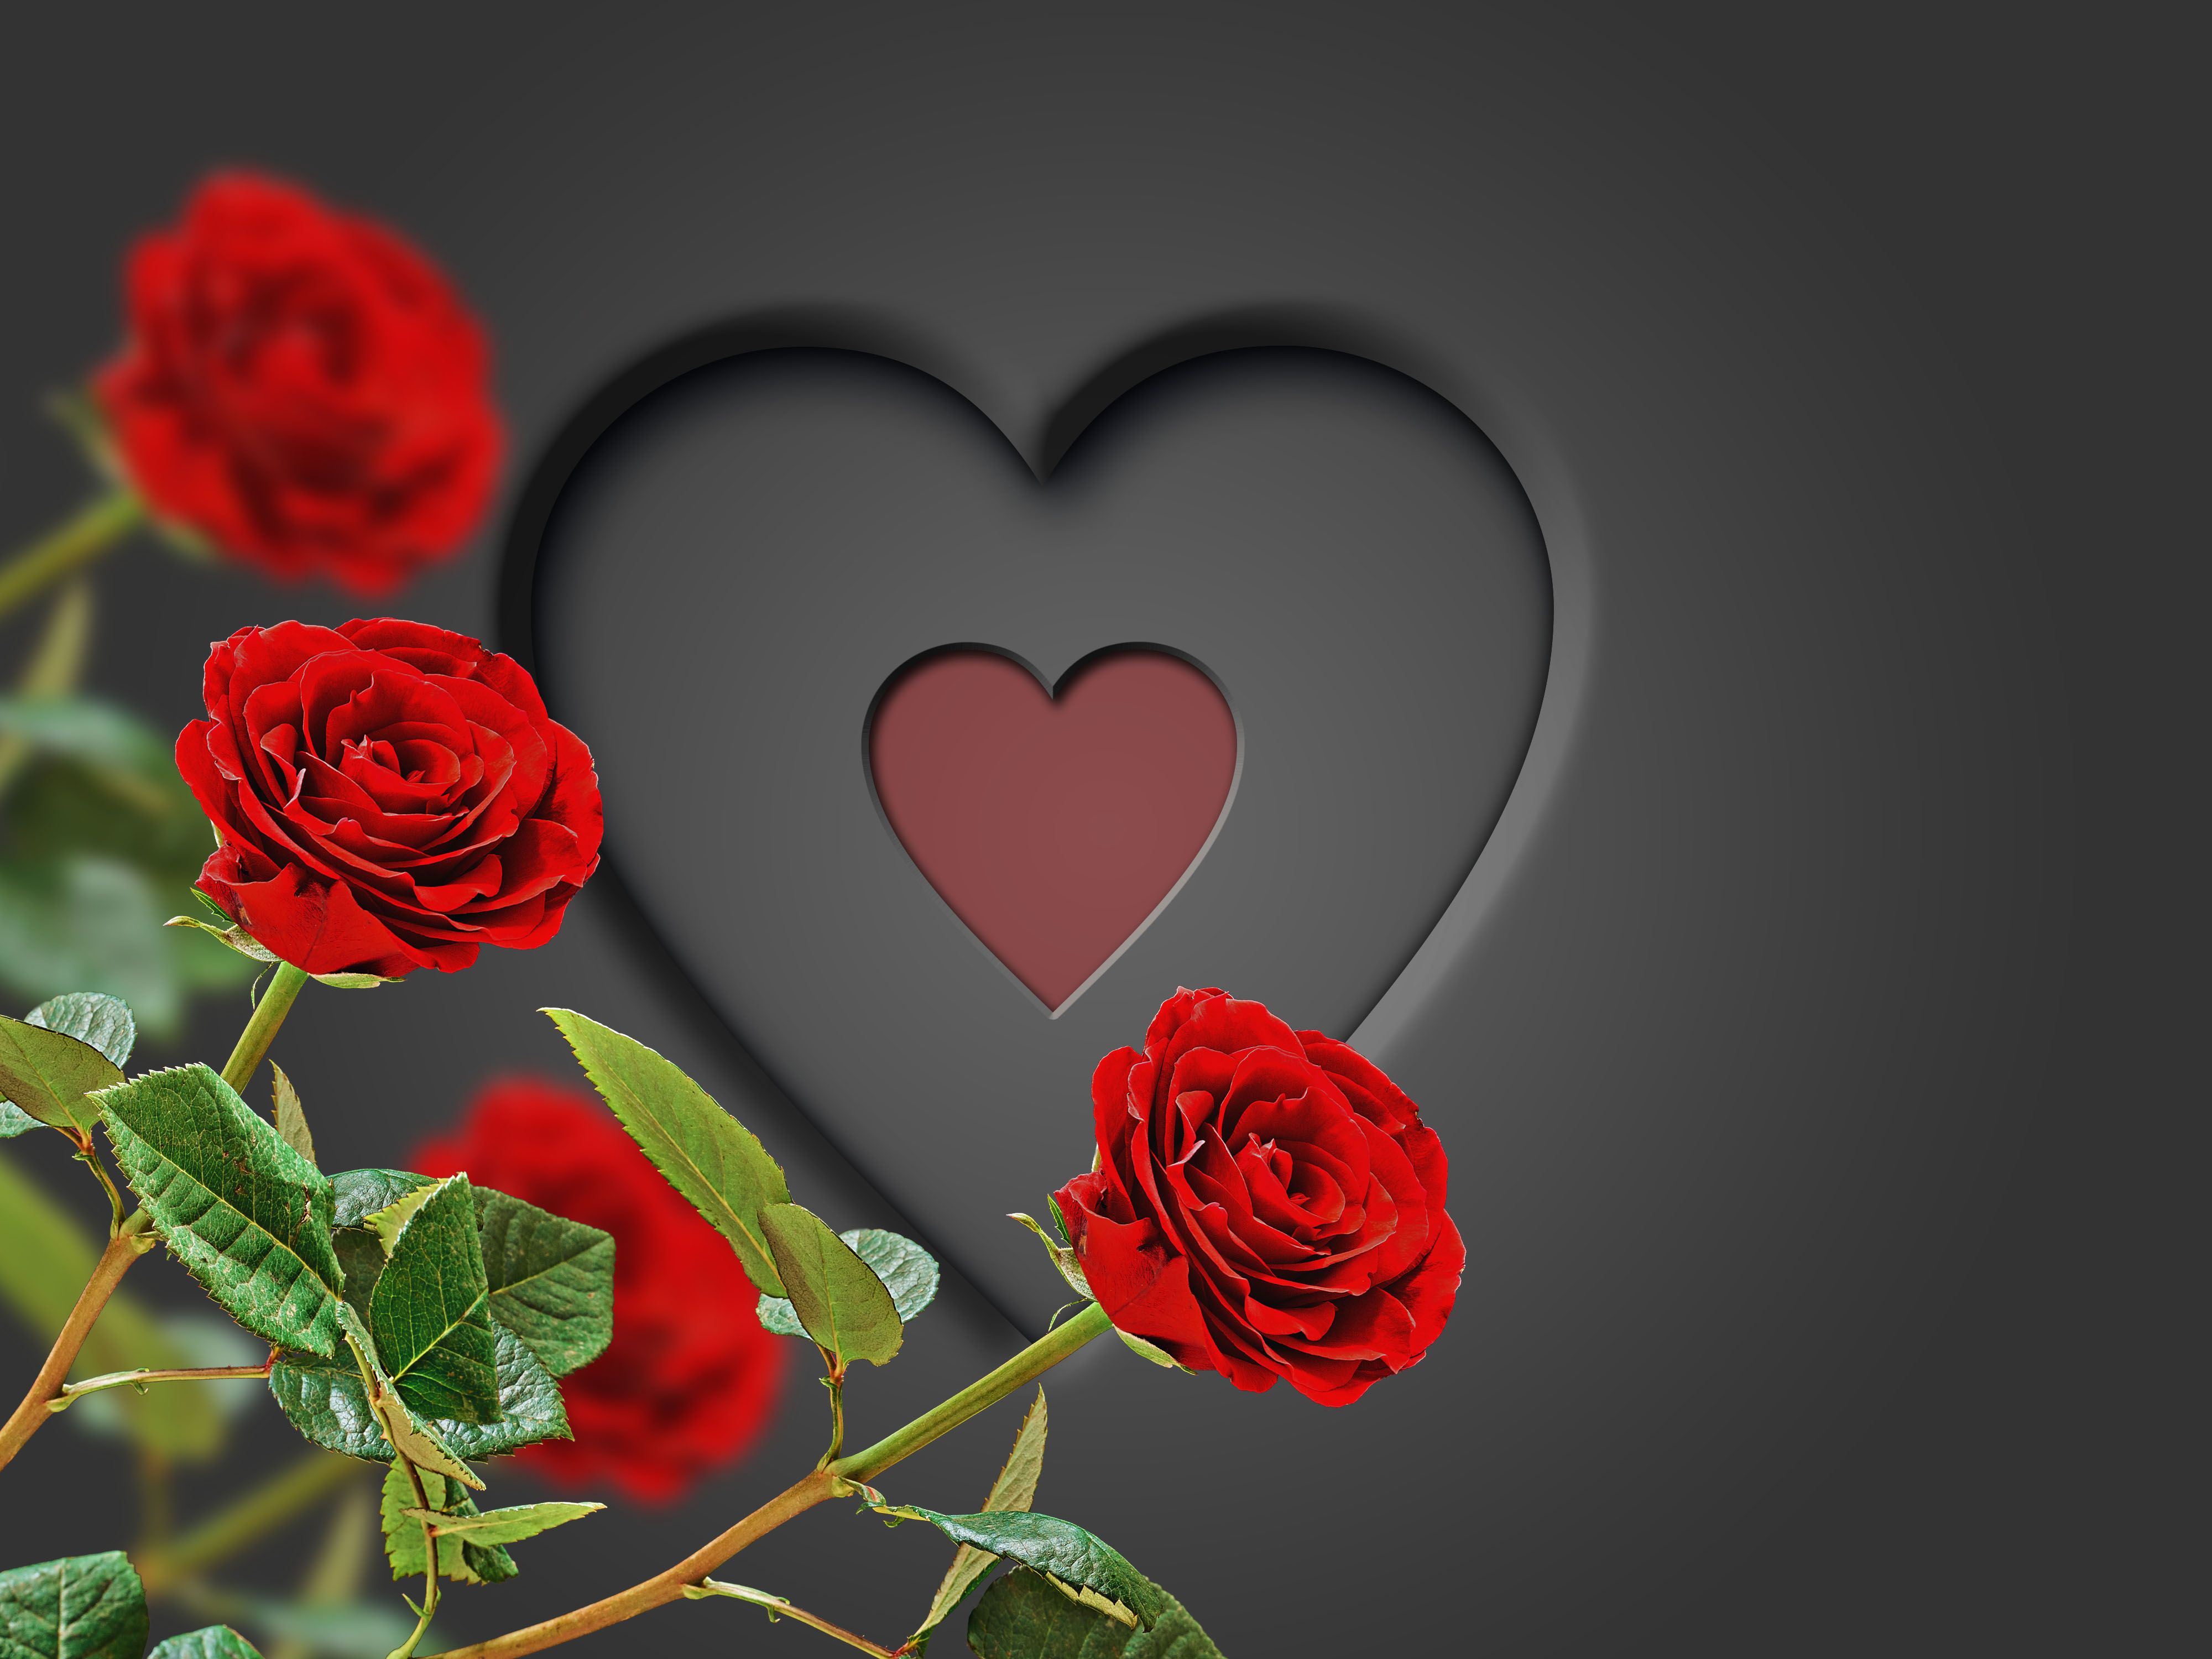 Heart with red roses 4k Ultra HD Wallpaper. Background Image